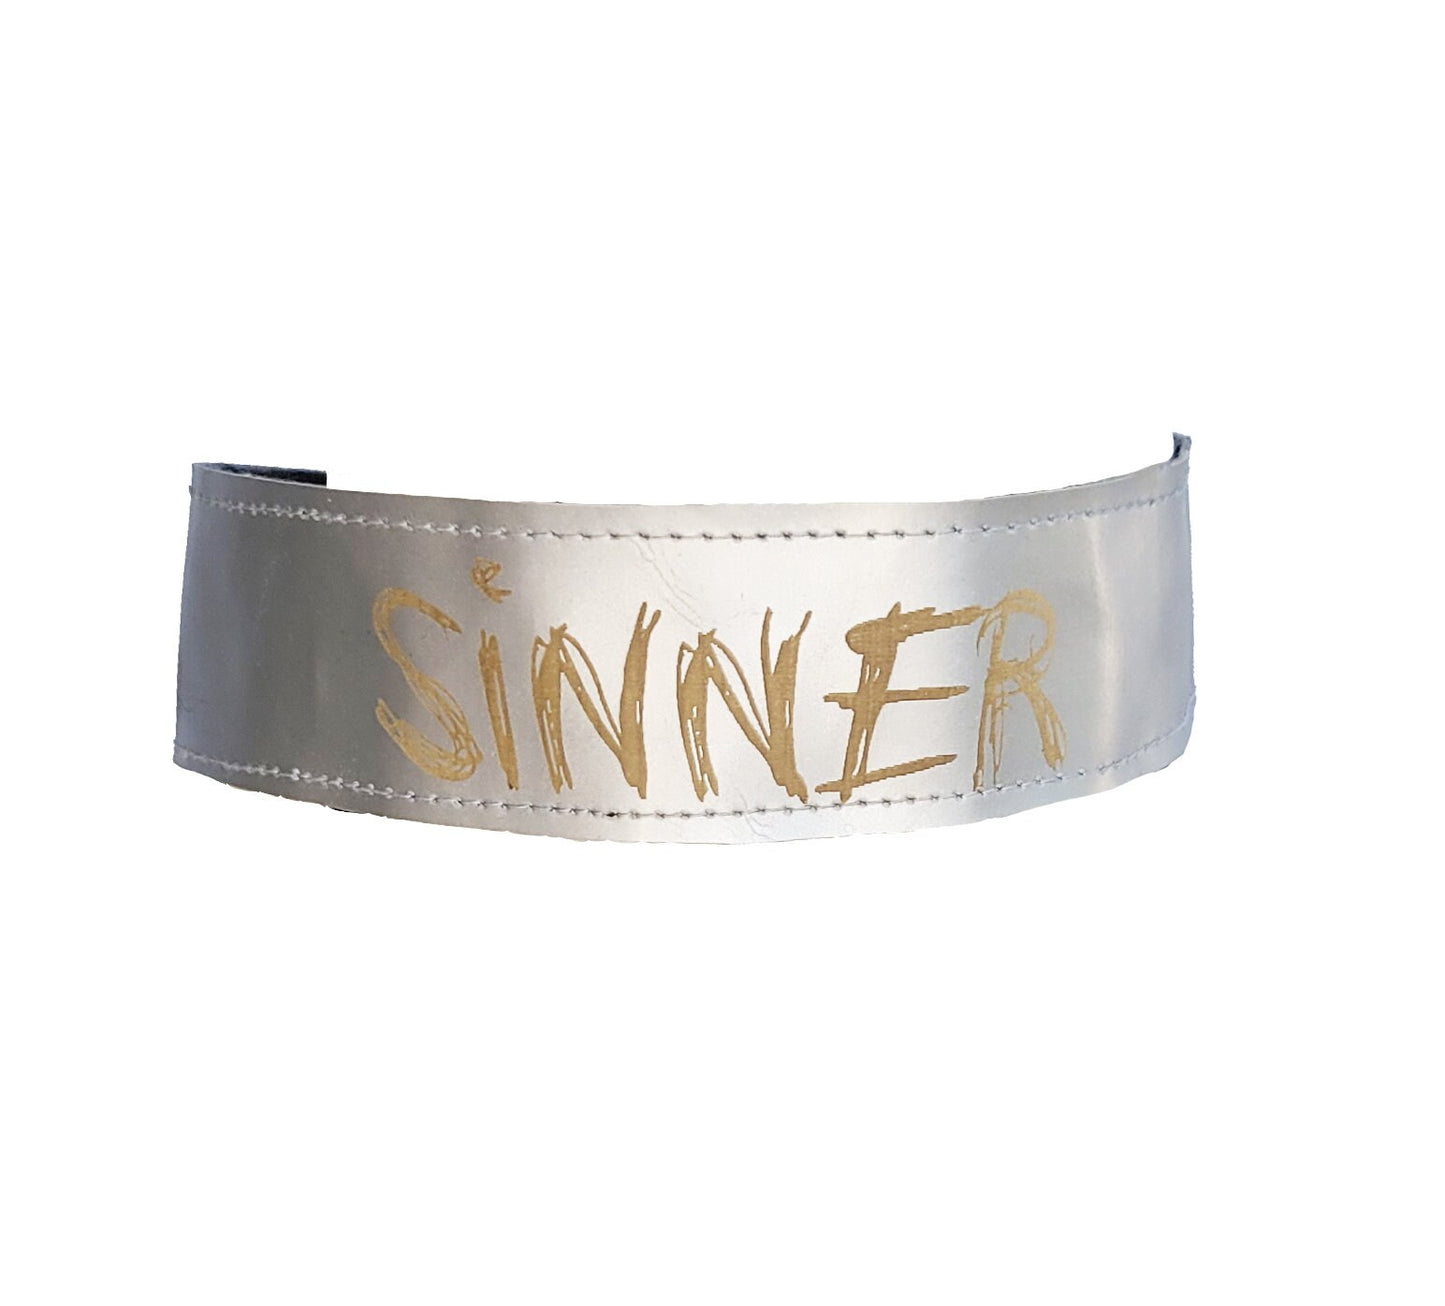 Sinner laser etched studded silver leather choker | goth choker gothic collar | womens choker collar red gothic necklace kinky clothing